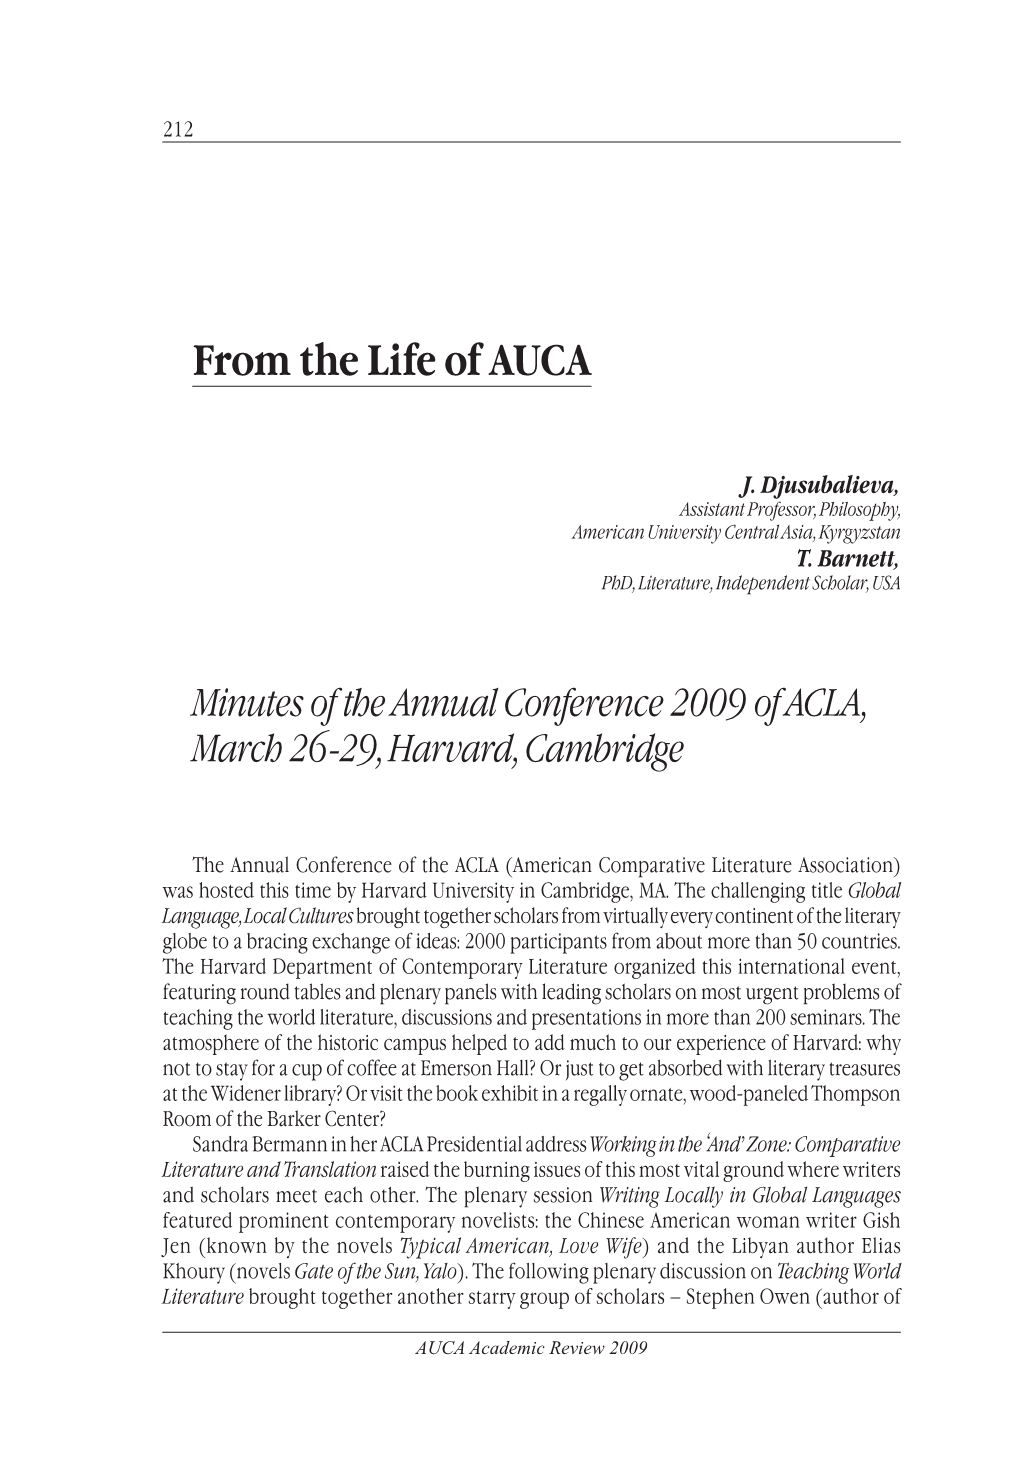 From the Life of AUCA